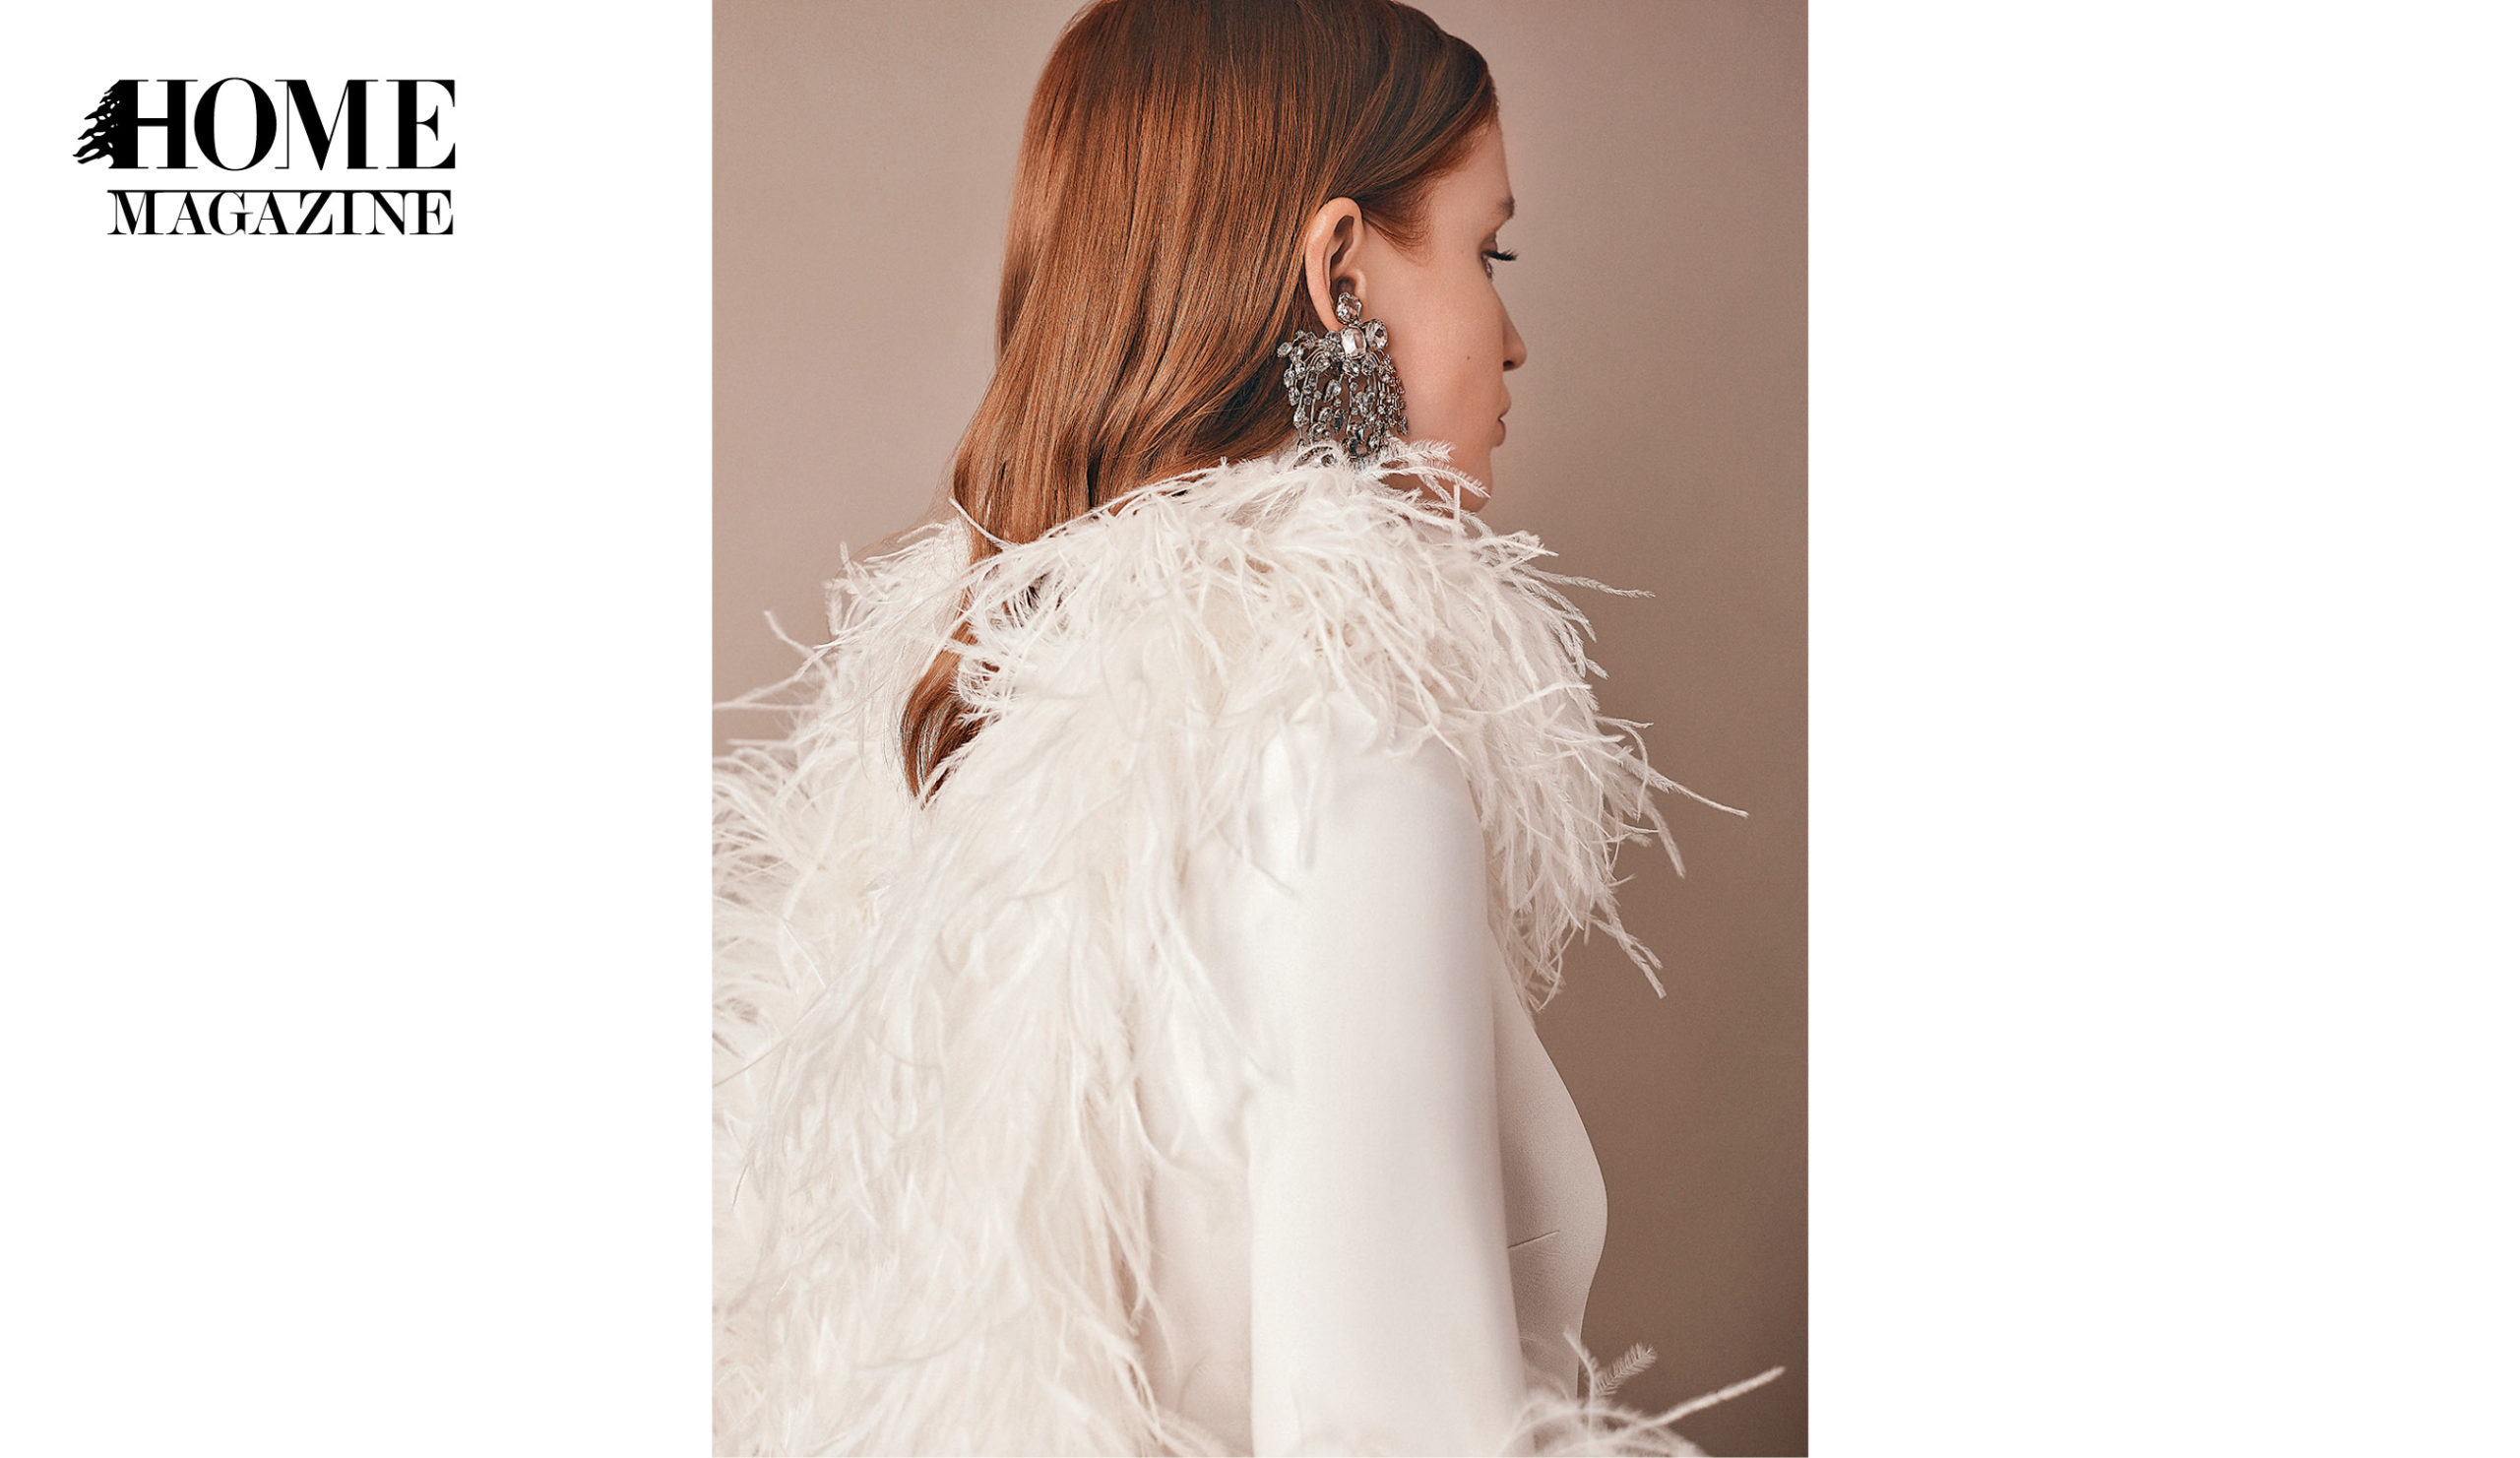 Profile of a model wearing big silver earing and a white blouse with feathers